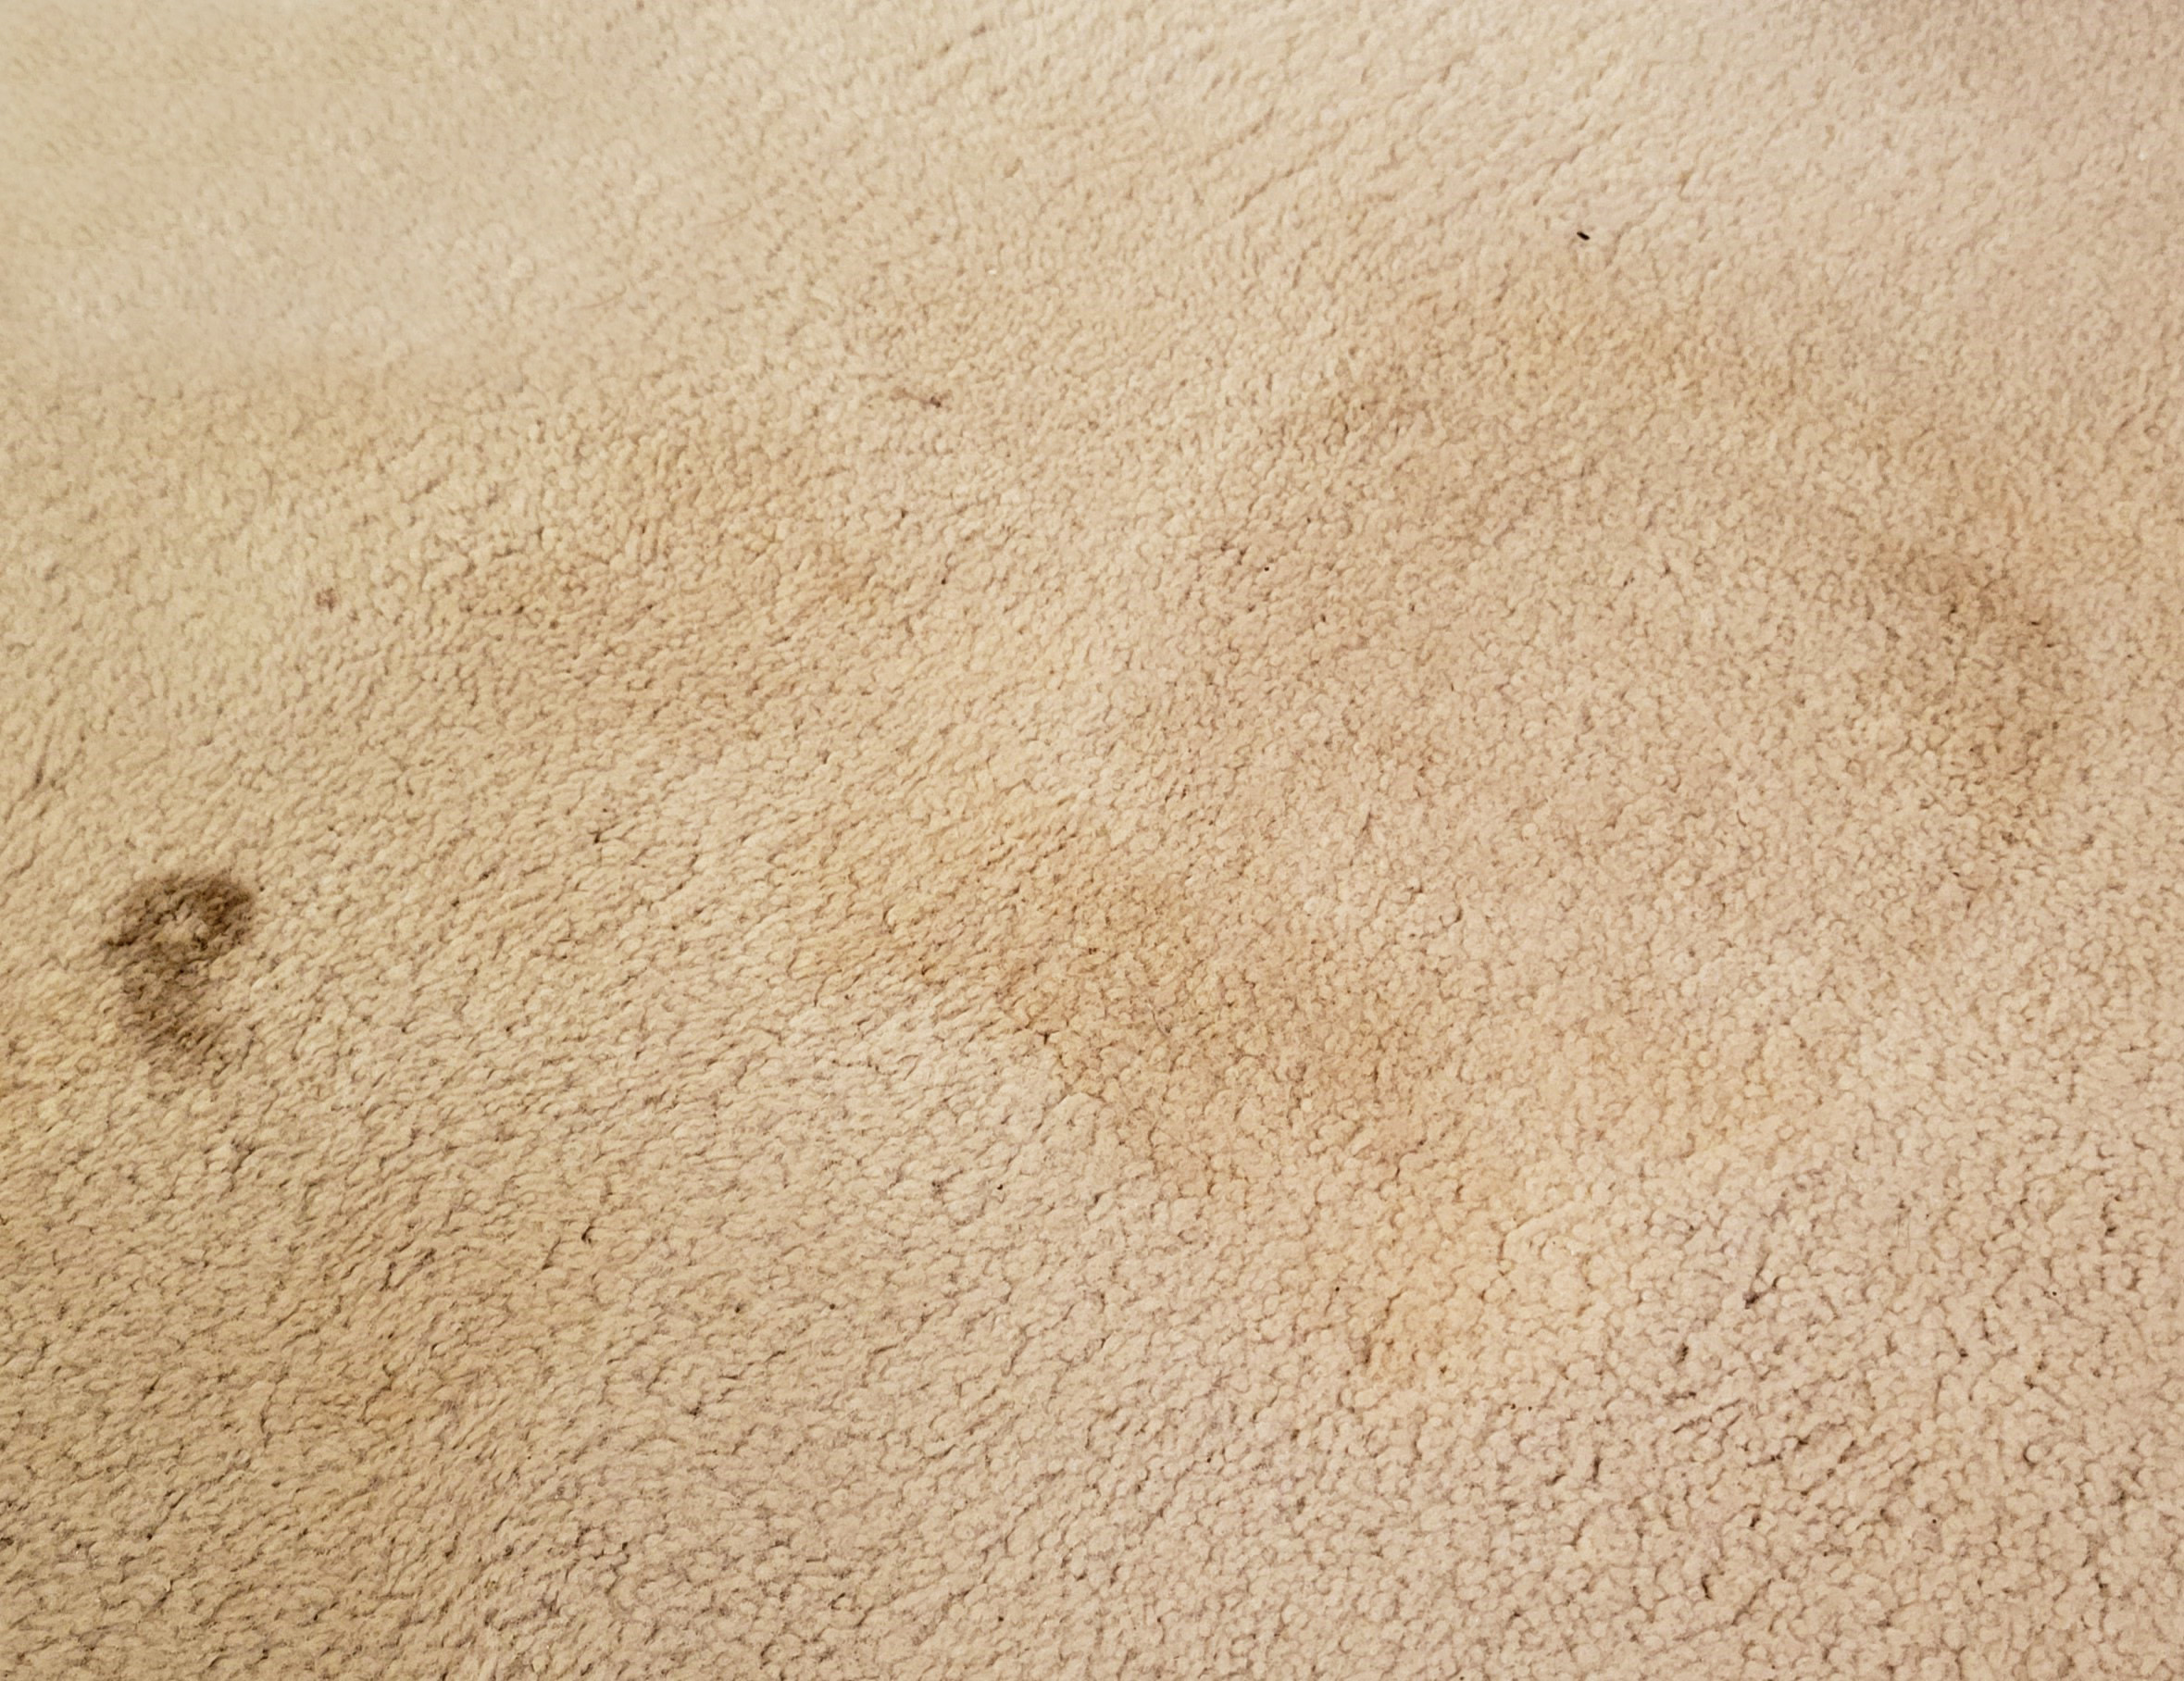 Rug Cleaner South Elgin Illinois